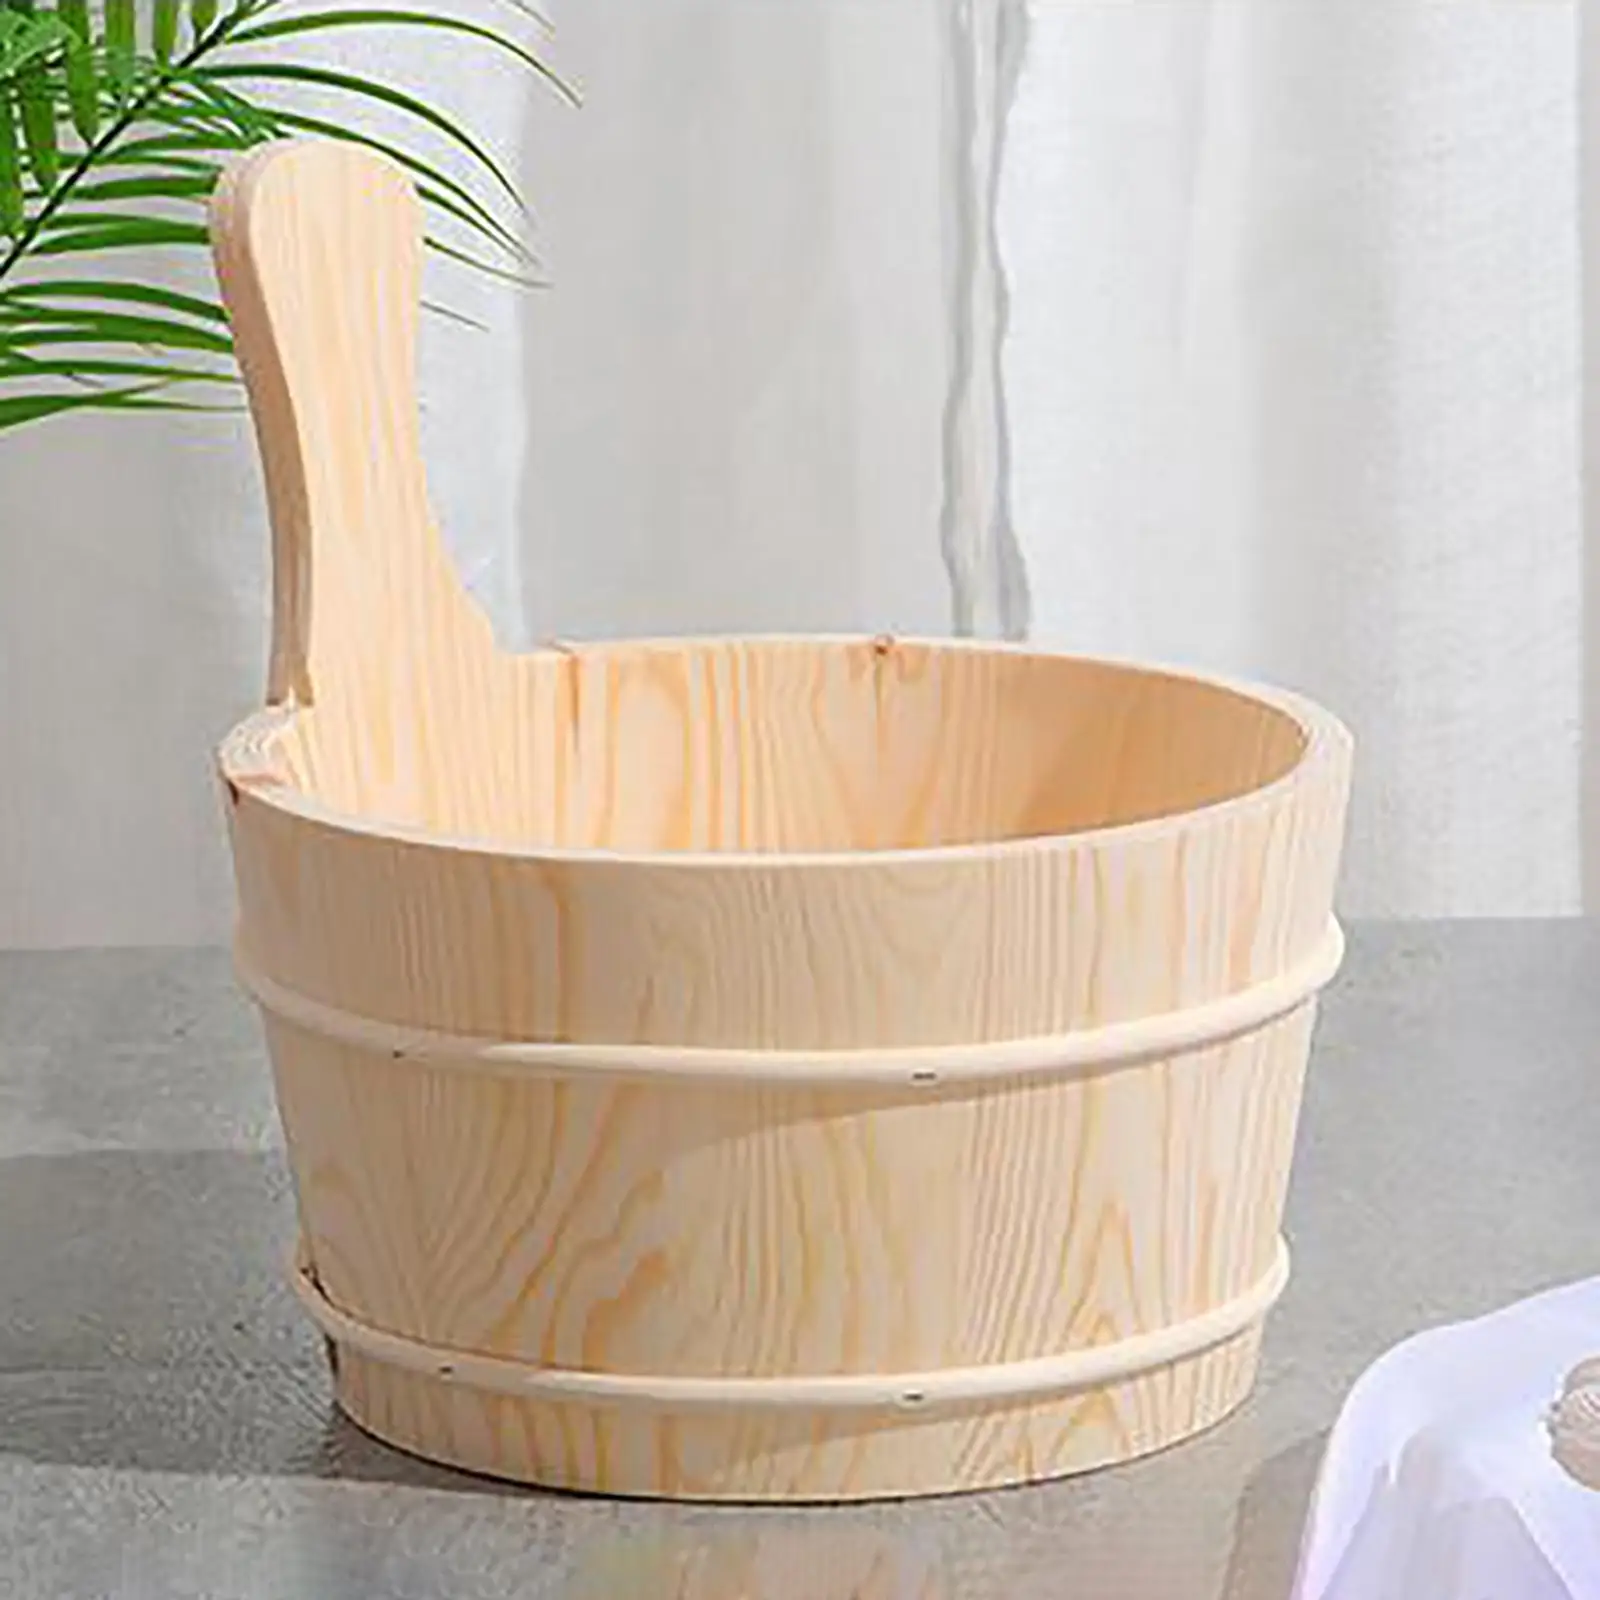 Sauna Bucket Barrel Set with Liner 4L Wood with Laddle Handmade Portable for 